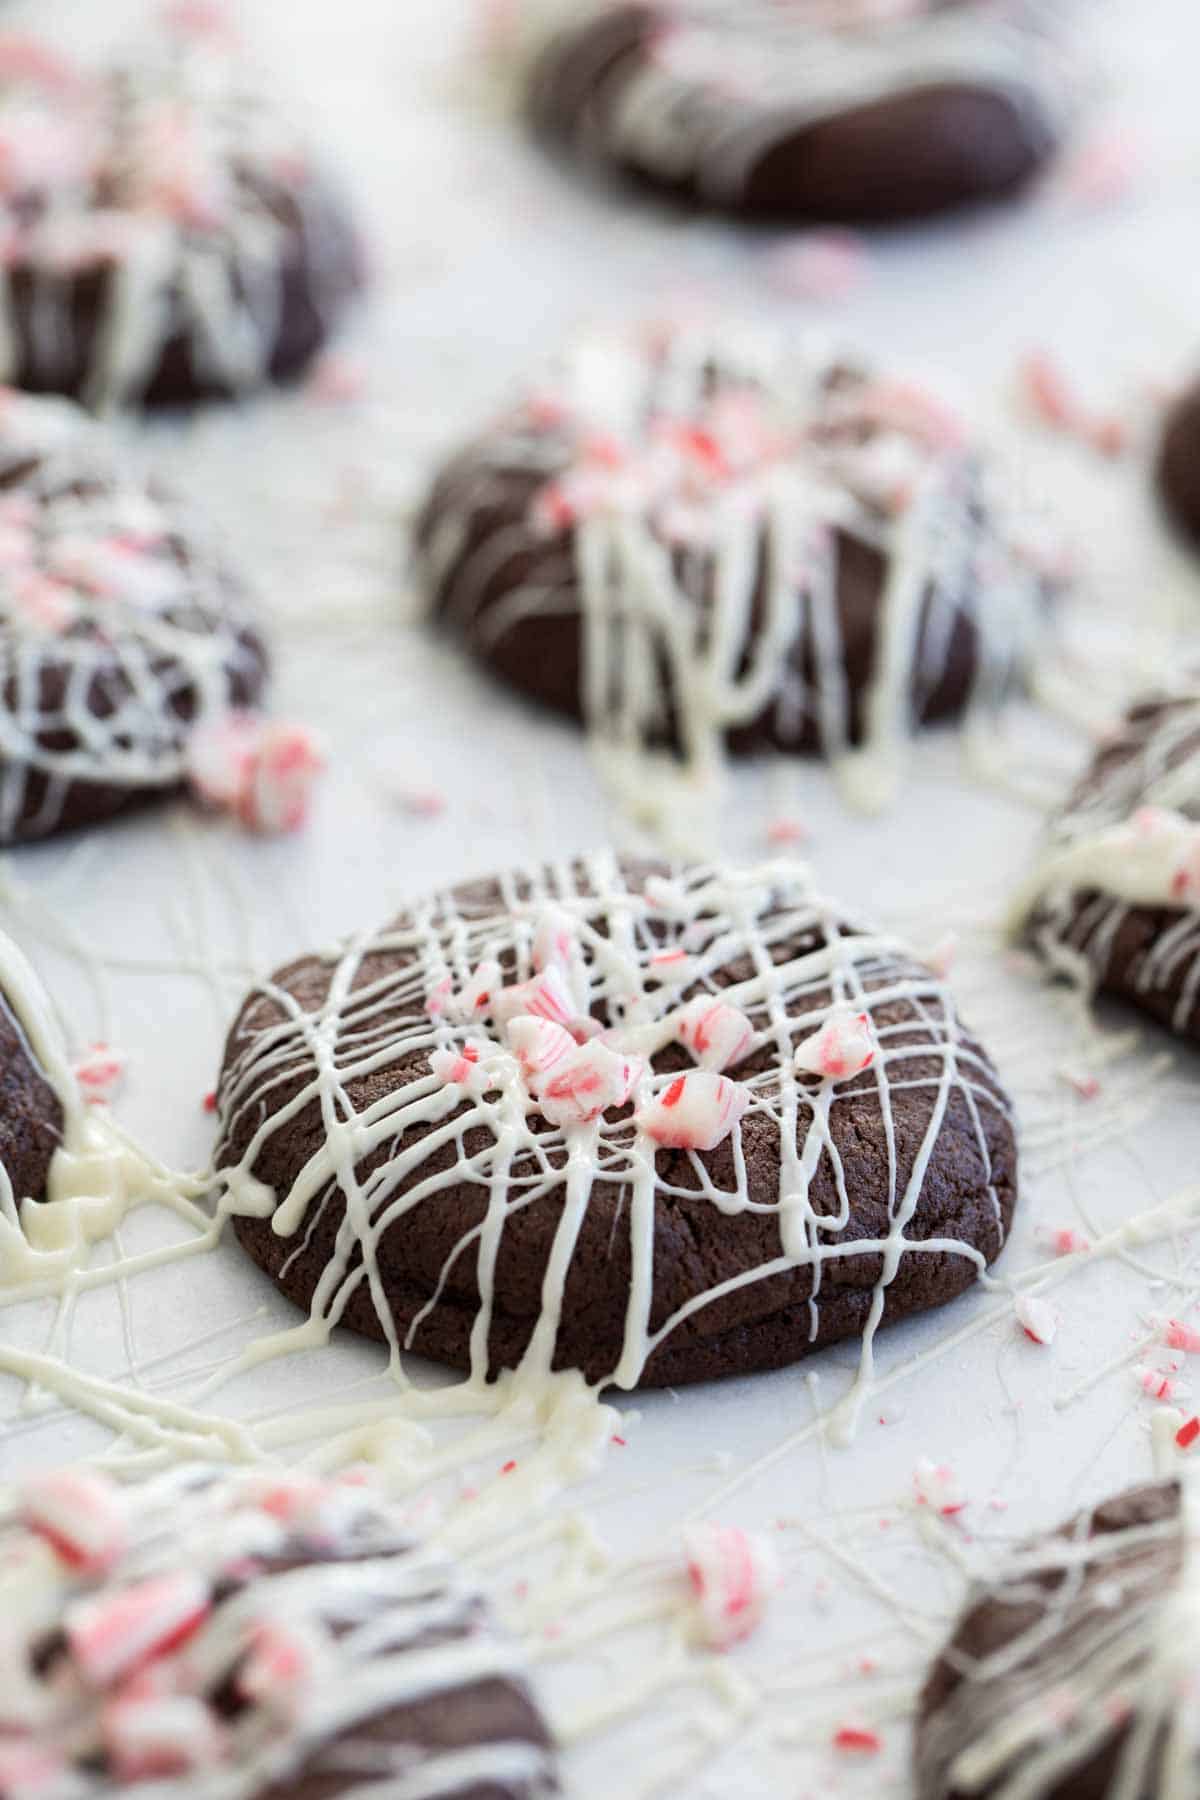 Chocolate Peppermint Cookies topped with white chocolate and candy canes